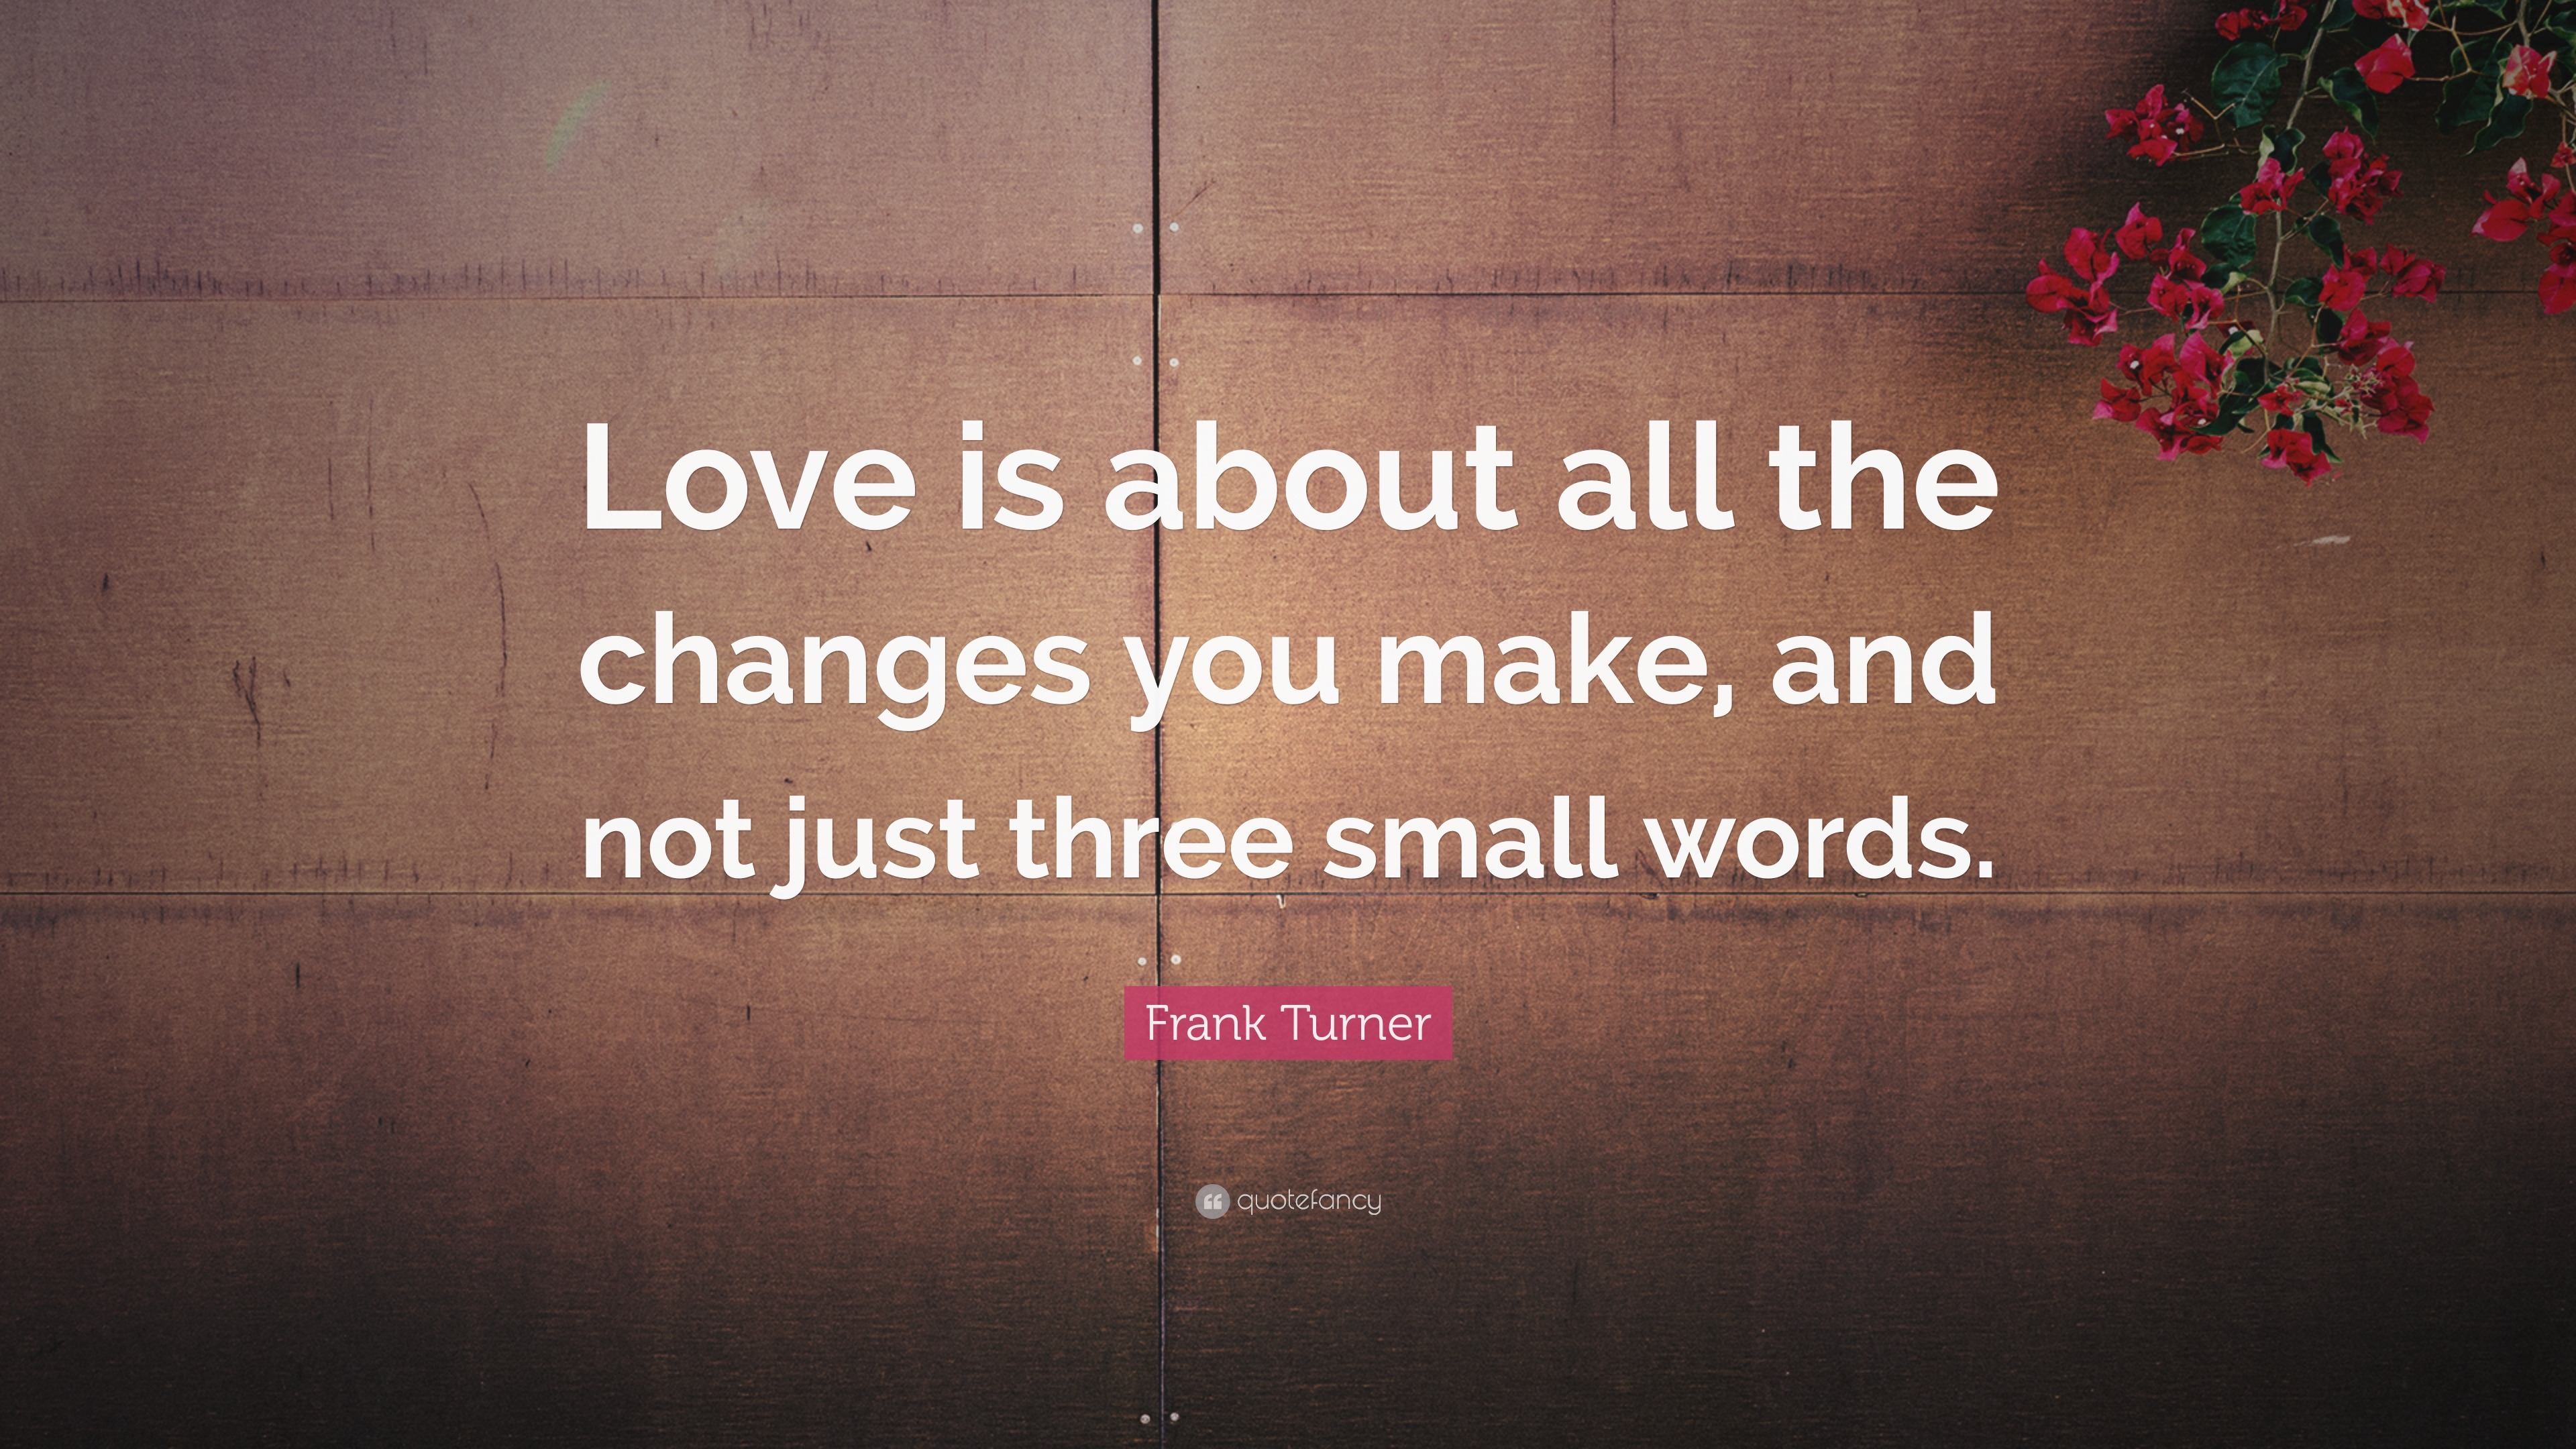 Frank Turner Quote: “Love is about all the changes you make, and not ...